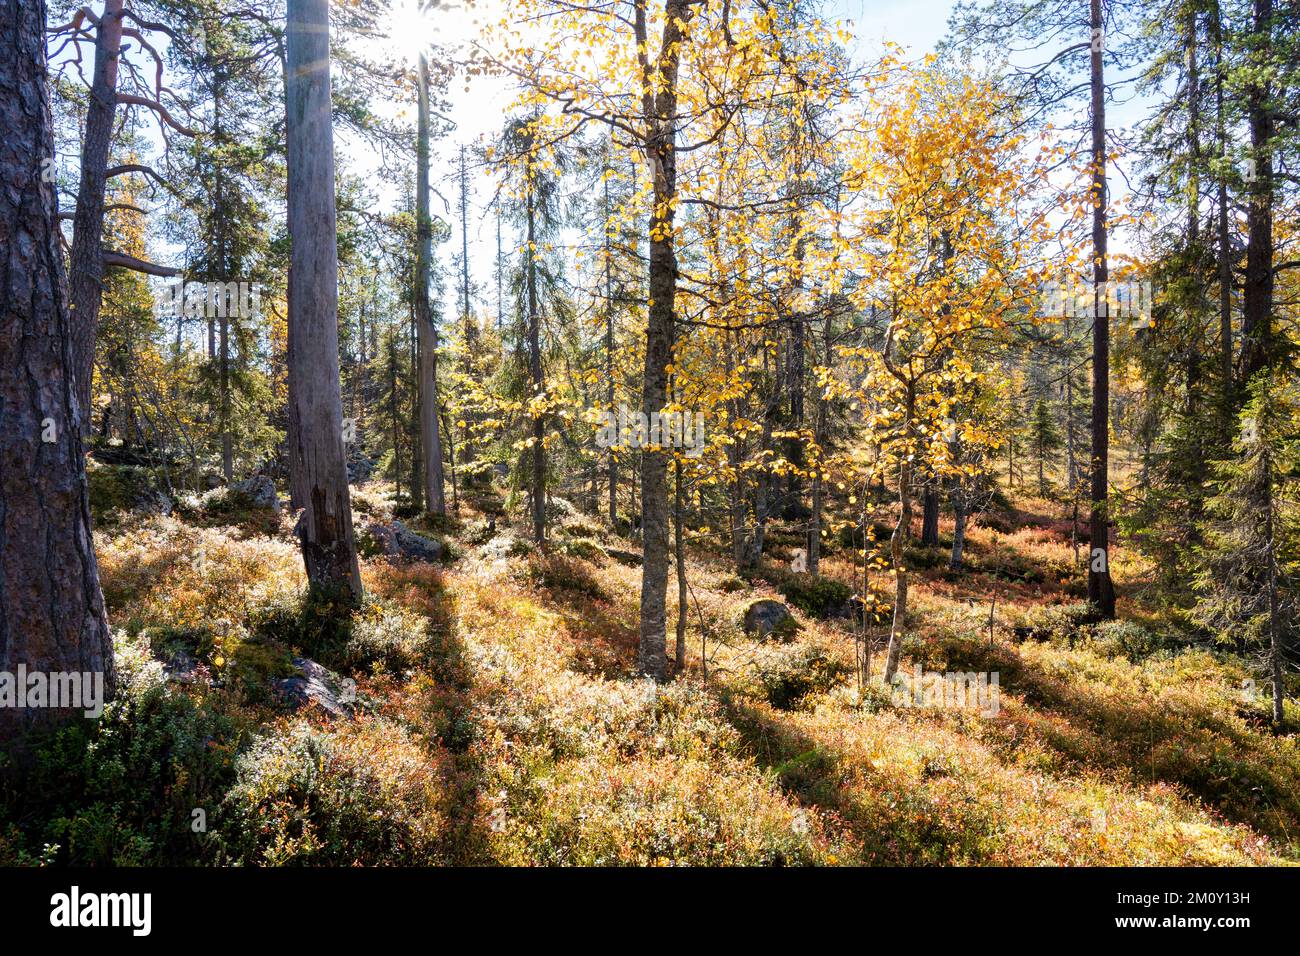 A view of an autumnal old-growth forest in Salla National Park, Northern Finland Stock Photo